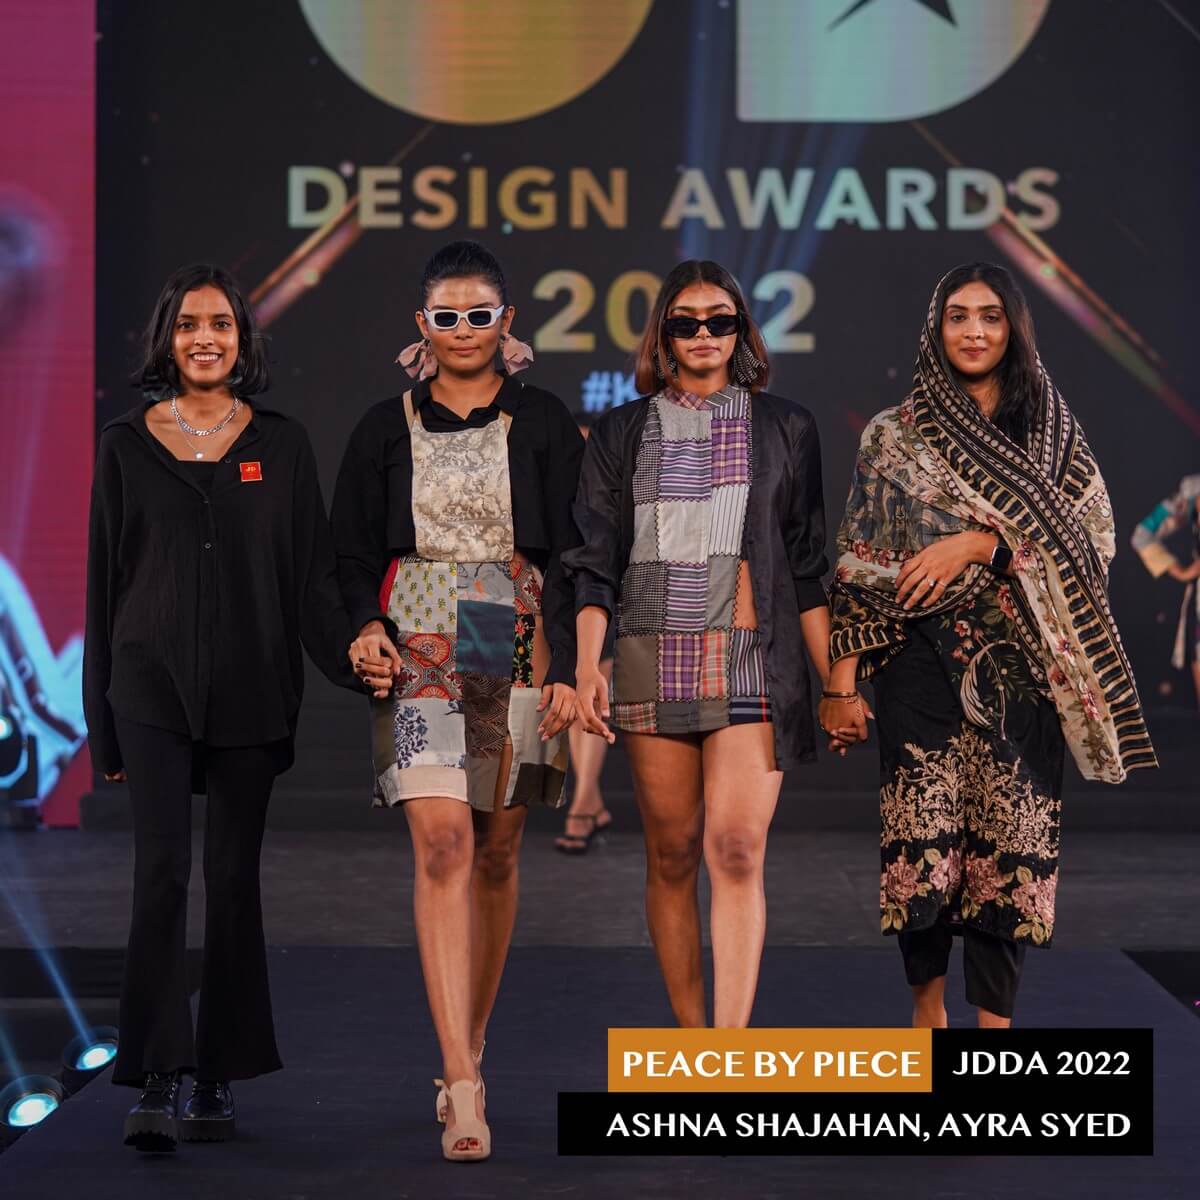 PEACE BY PIECE Sync JD Design Awards Academy of Design and Management